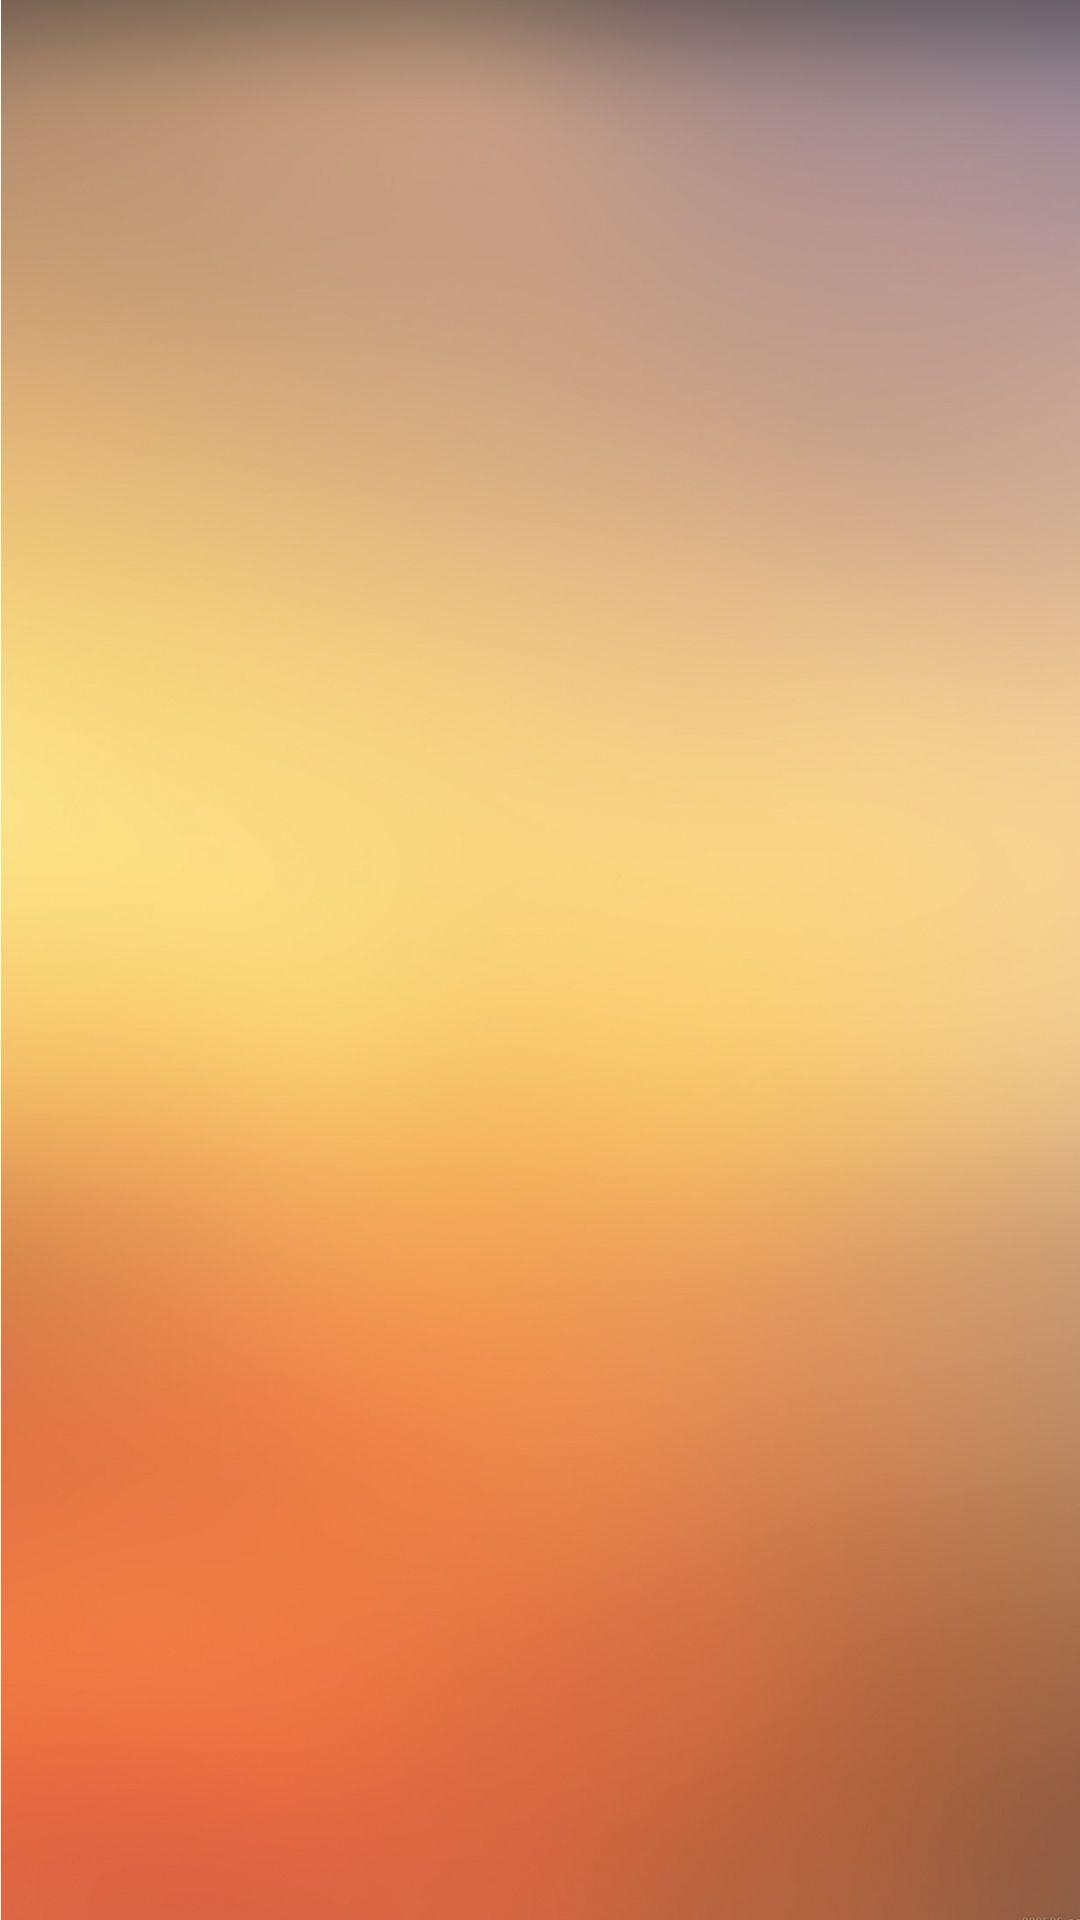 Sunset Fire Gradient. Tap to see more Blurred Gradient & Lights